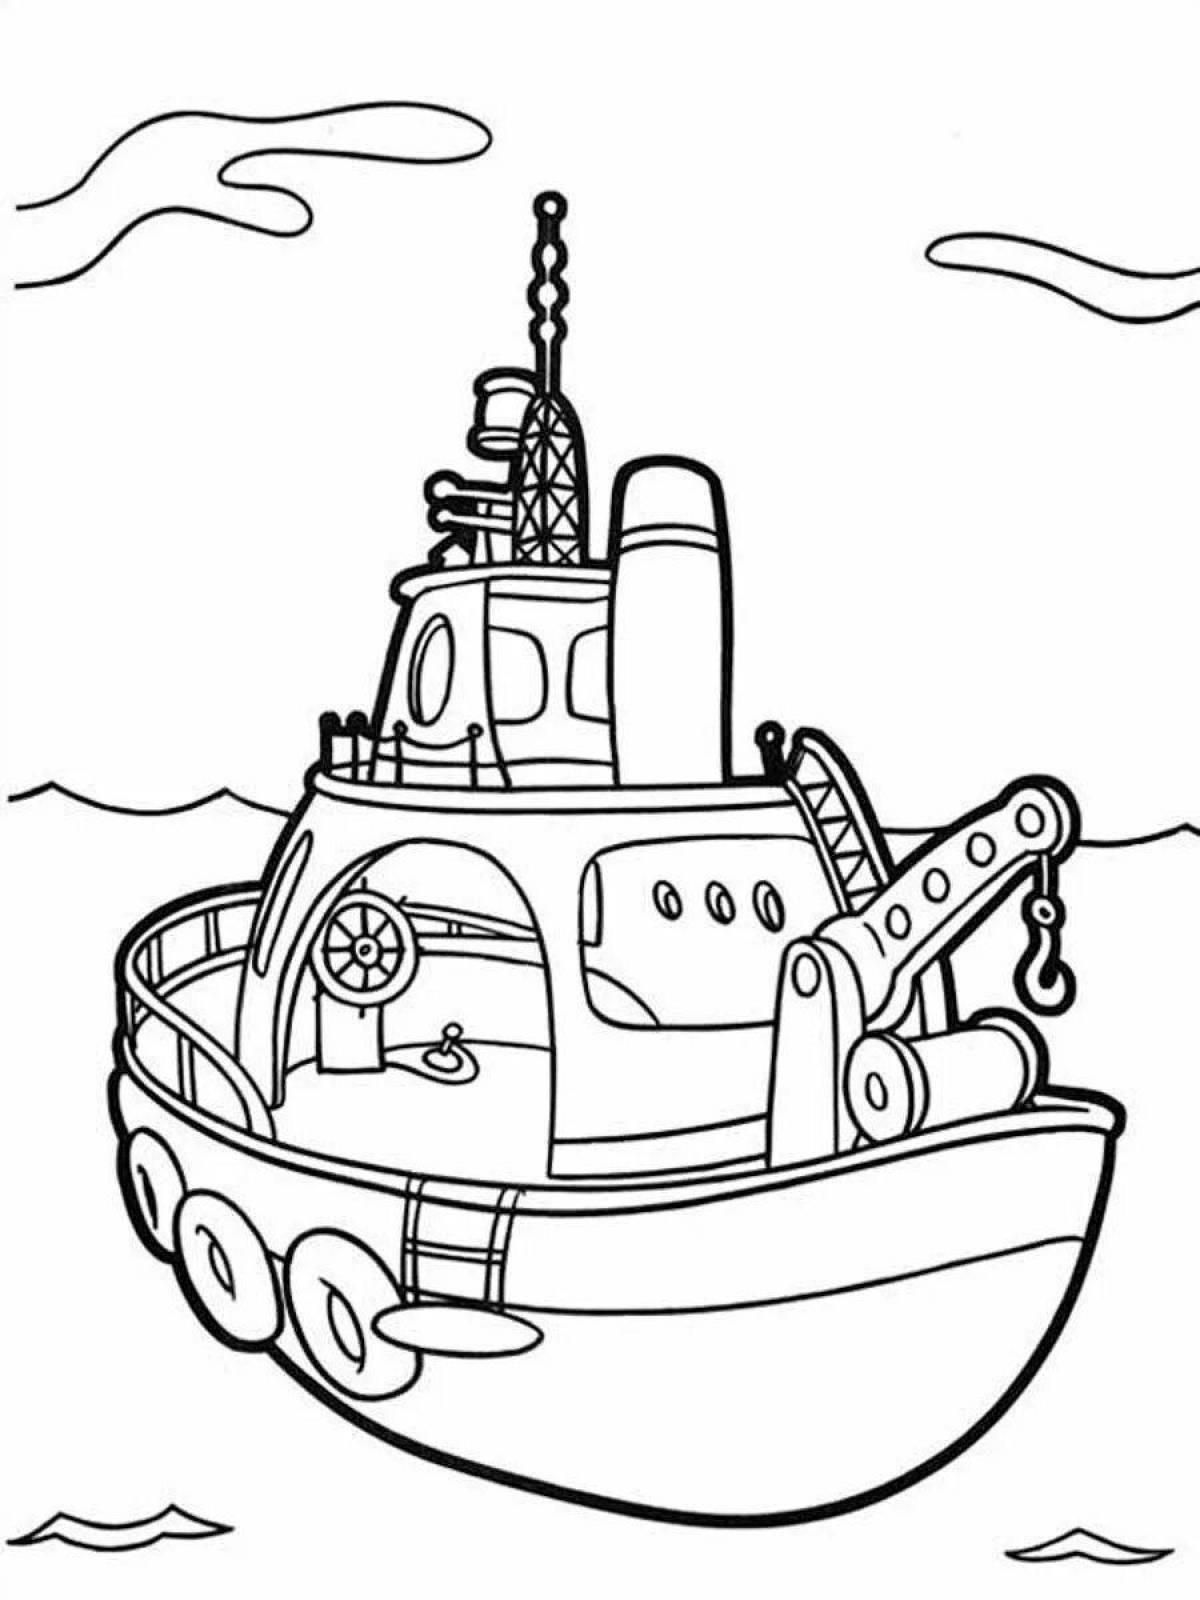 Inviting tugboat coloring book for kids